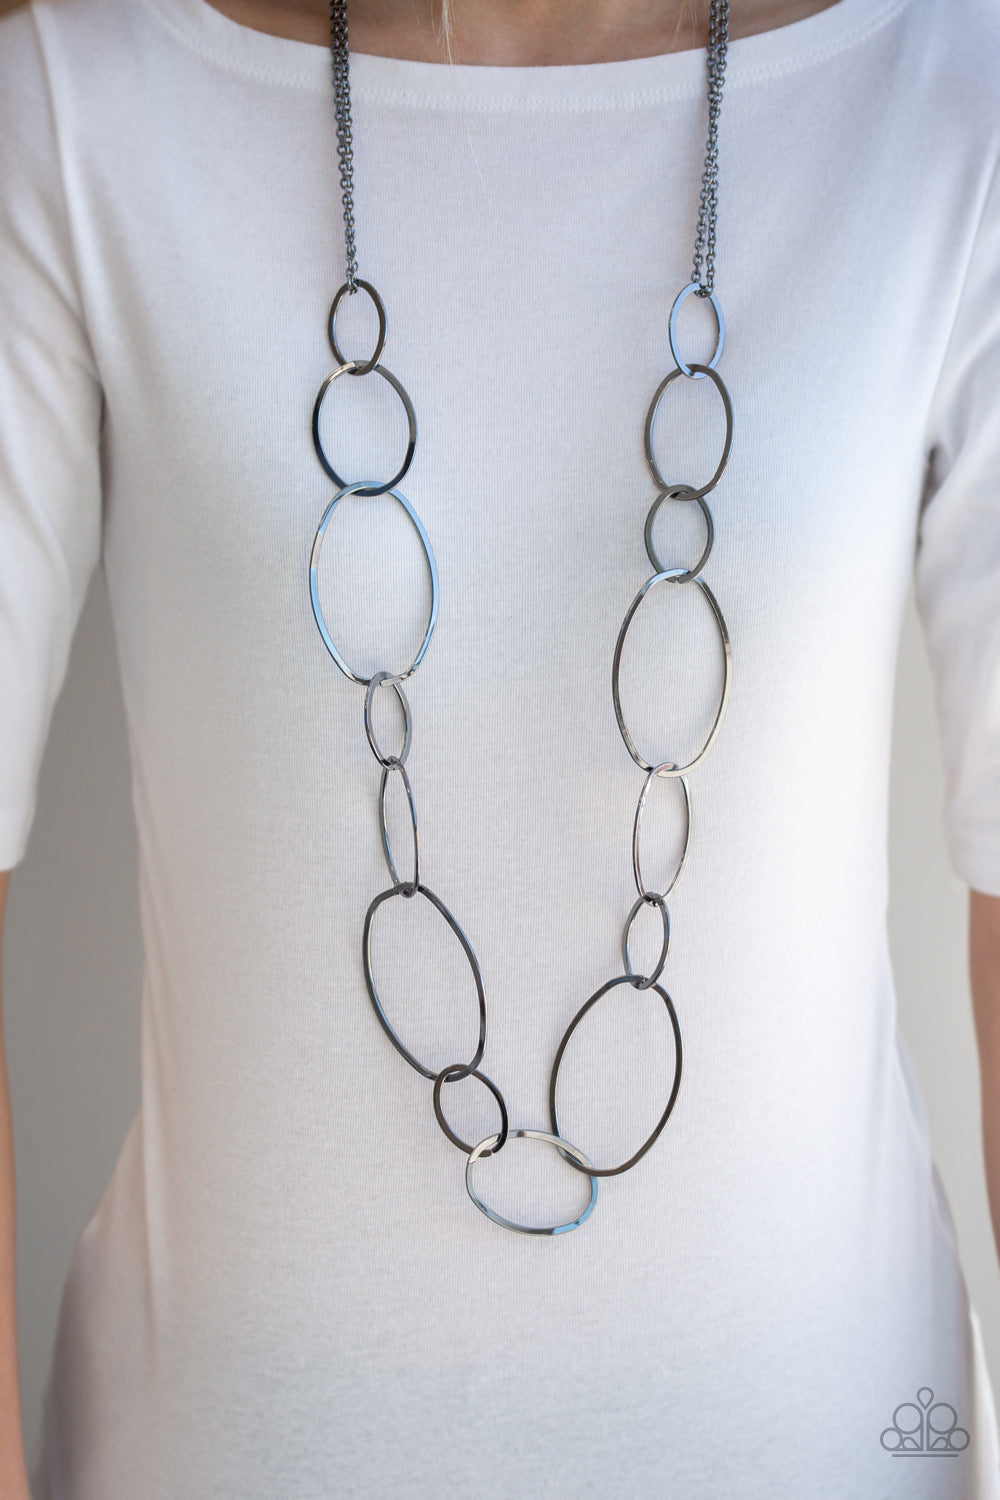 The Main Contender - Black Gunmetal Necklace - Chic Jewelry Boutique